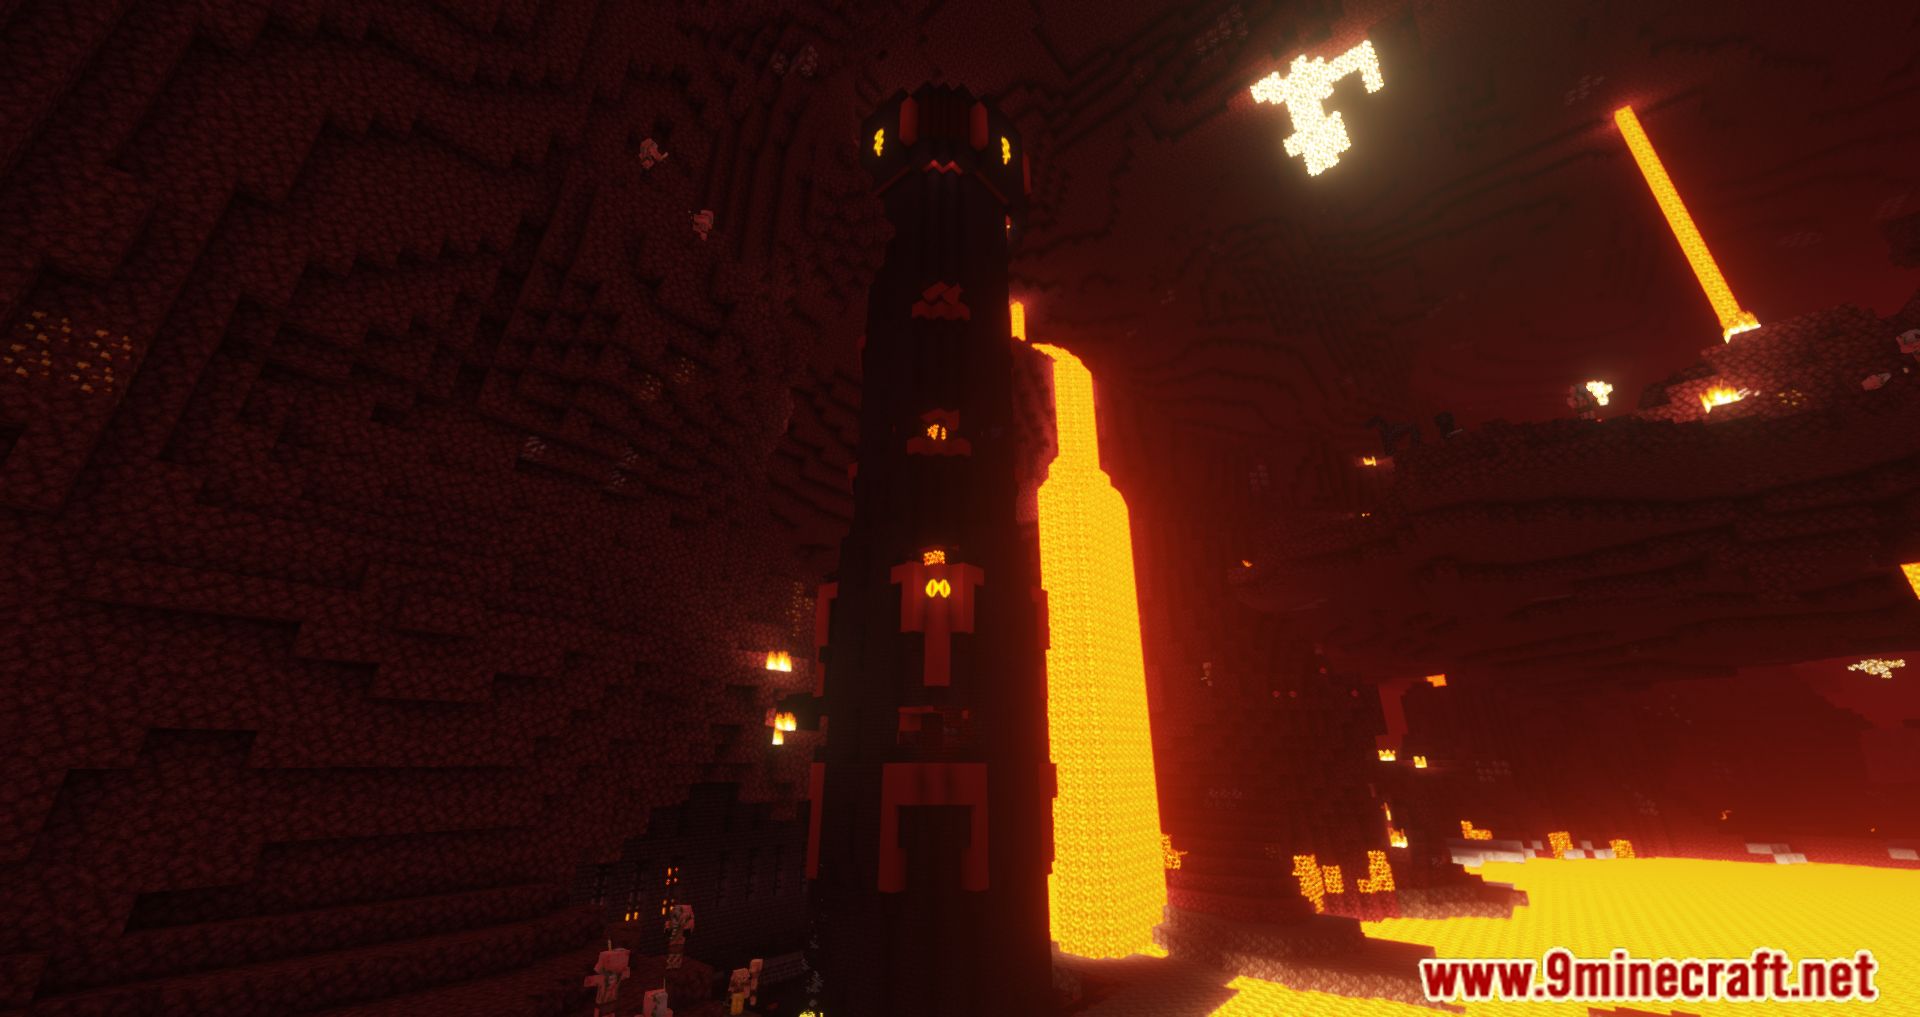 Nether Hexed Kingdom Mod (1.16.5, 1.12.2) - New Structures And Creatures For The Nether 3